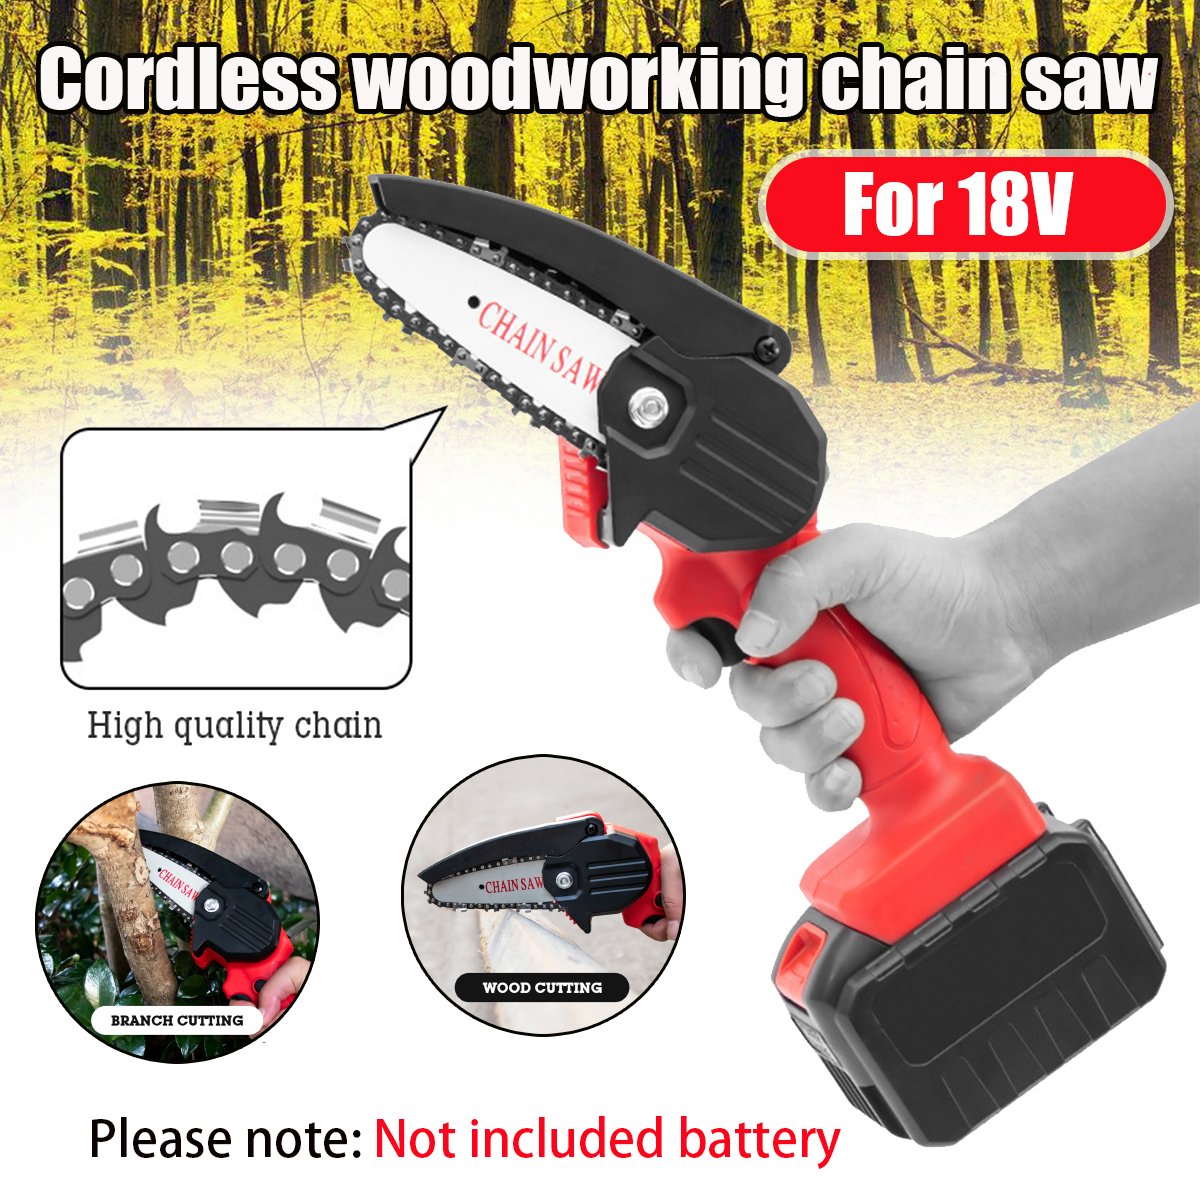 Portable-Electric-Saw-Woodworking-Chain-Saw-Tree-Pruning-Tool-for-18V-MakitaIzumi-Battery-1764621-1